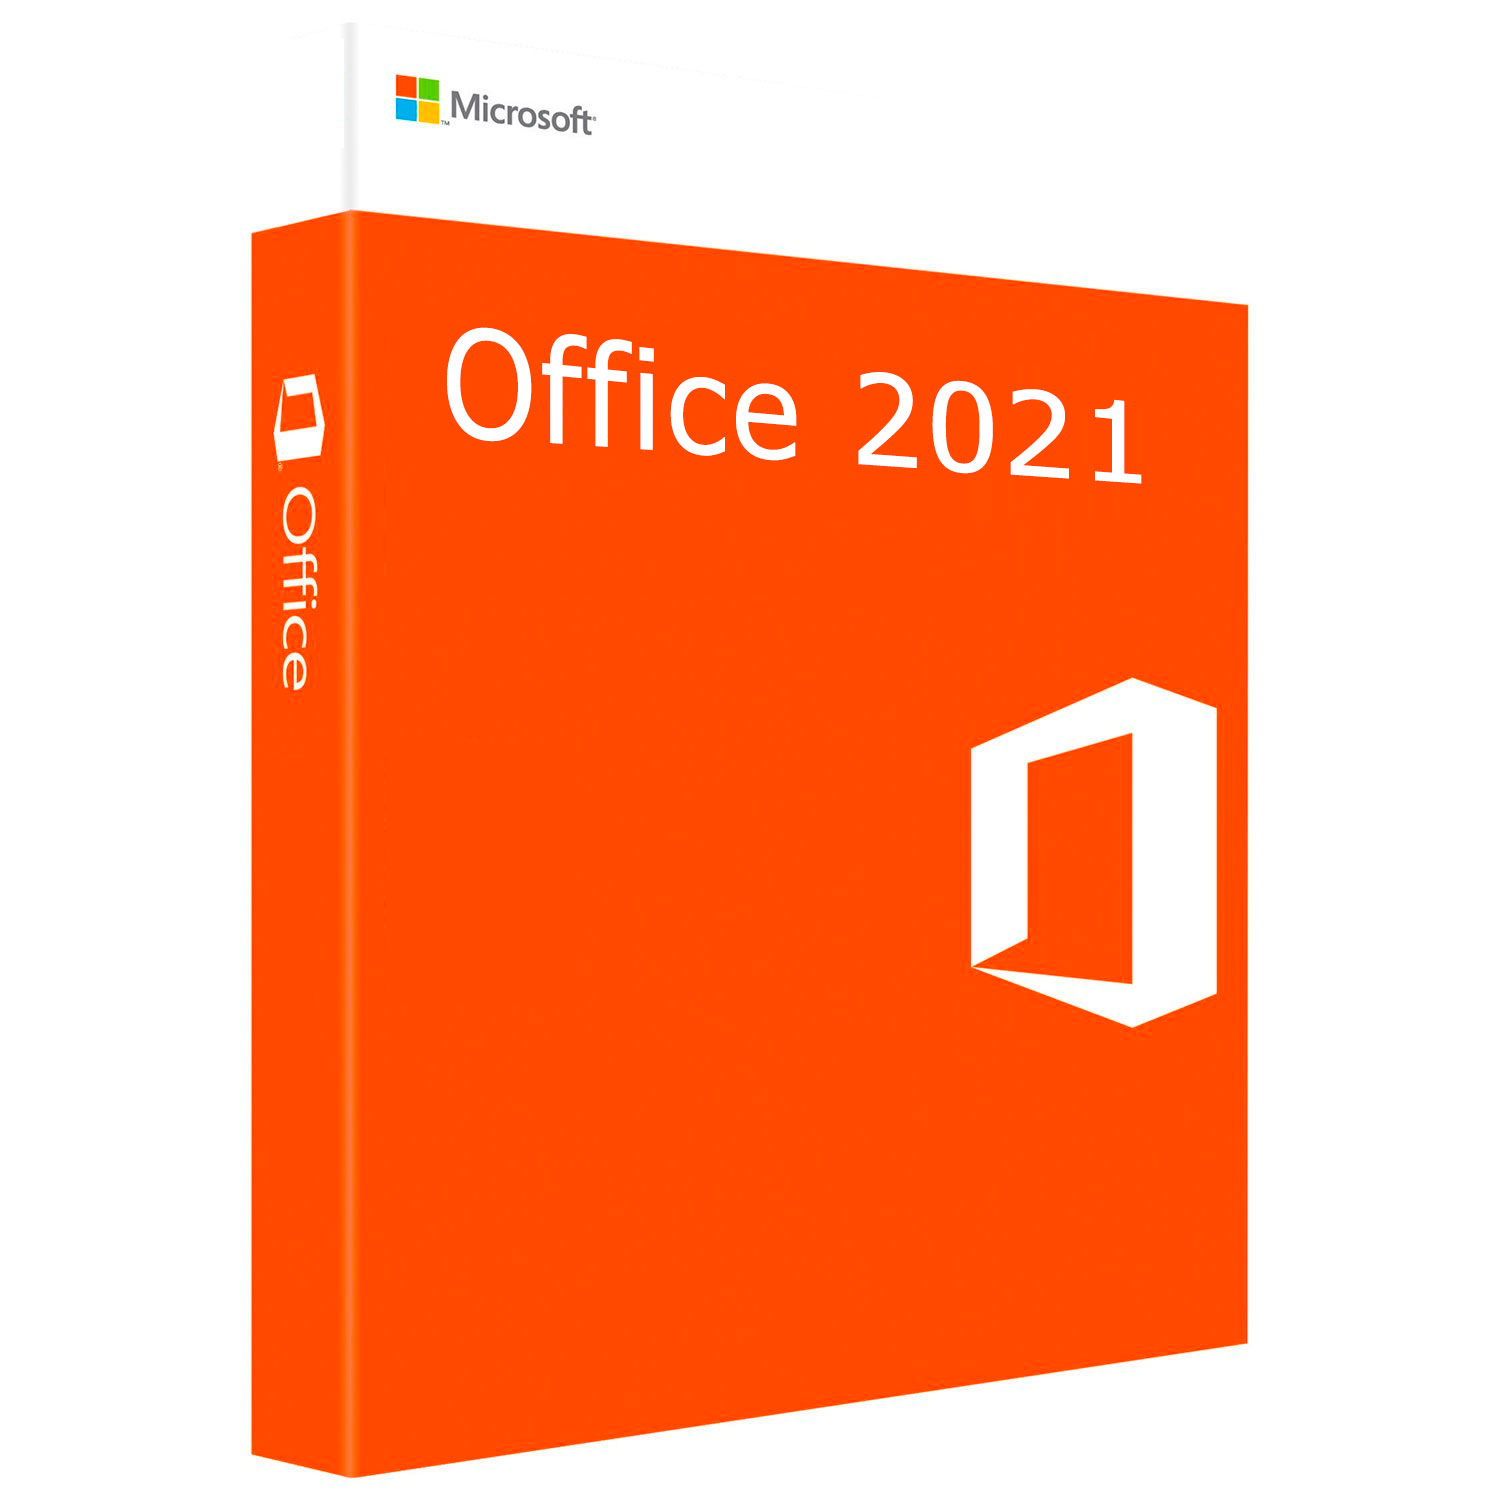 download office 2021